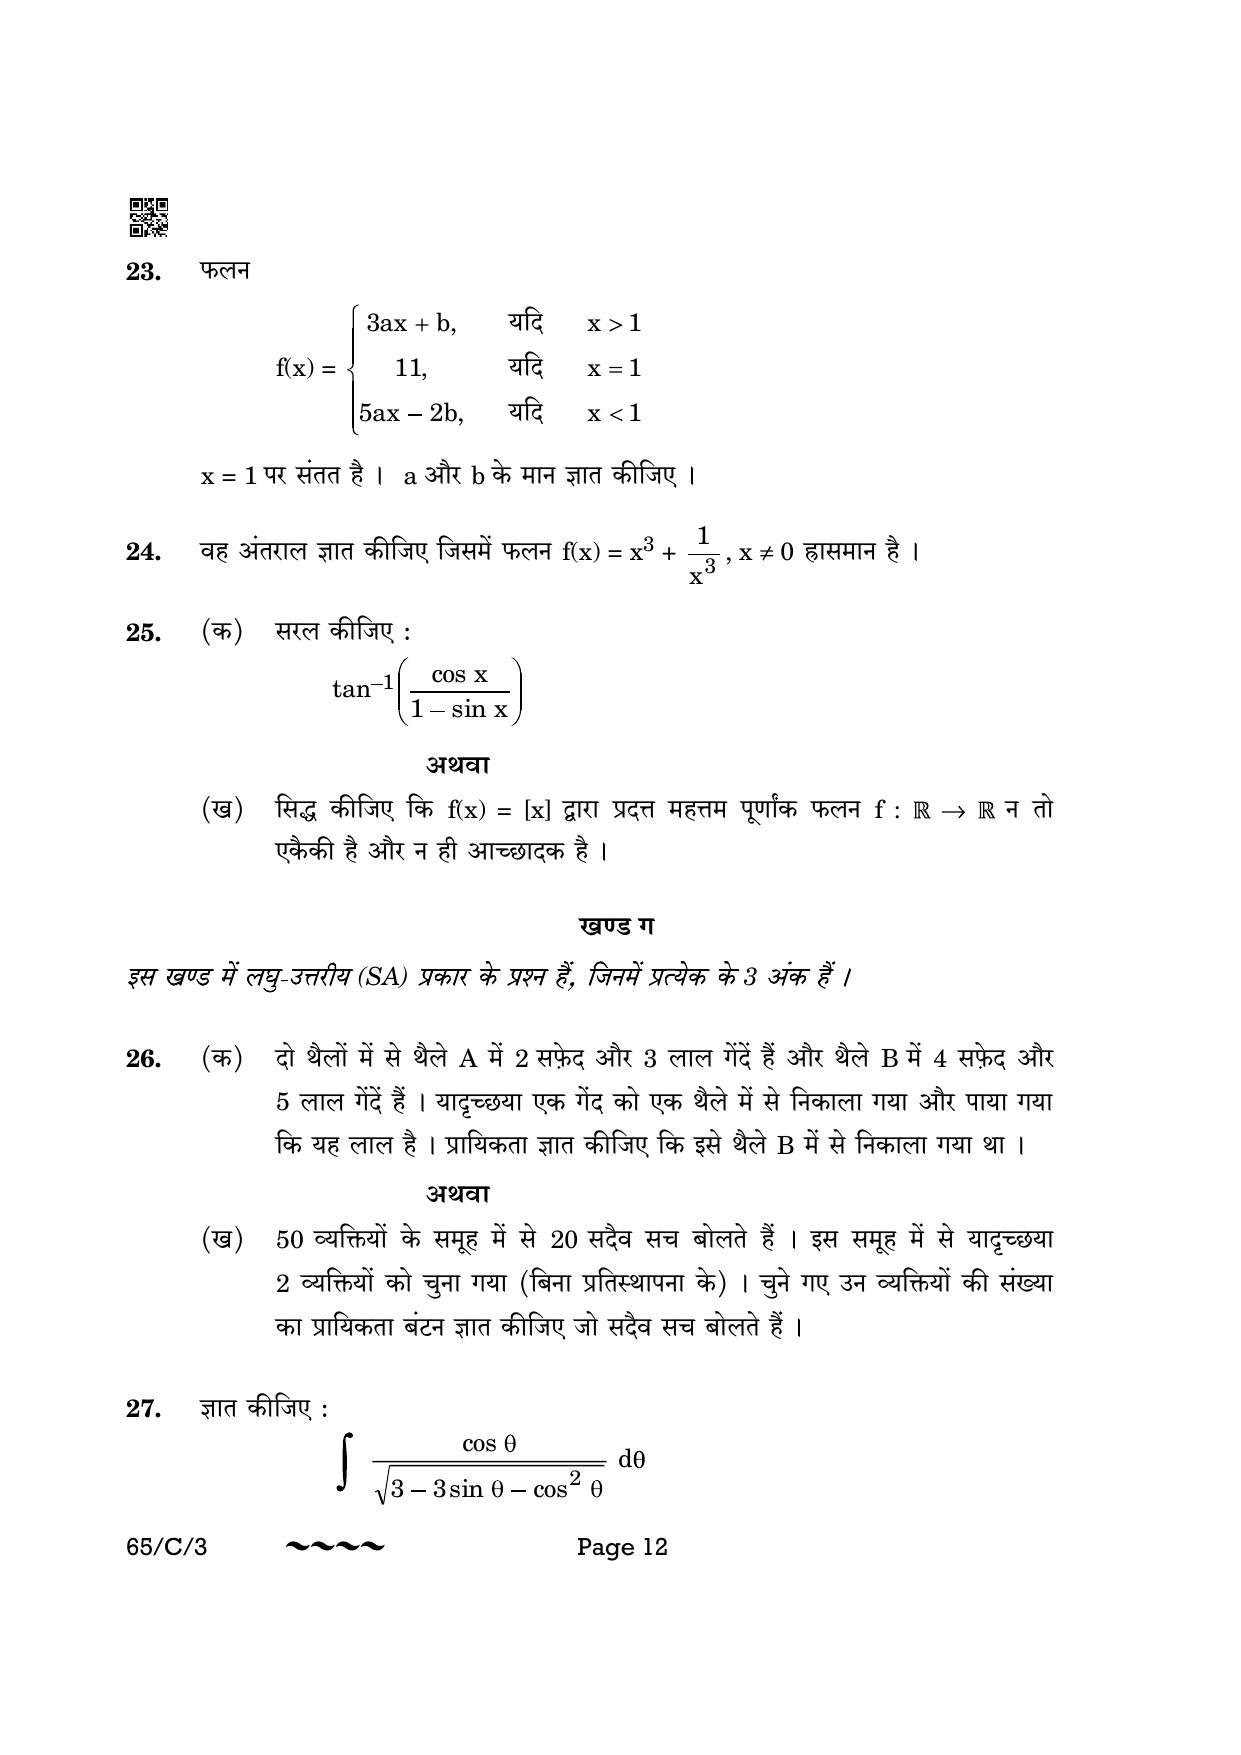 CBSE Class 12 65-3- Mathematics 2023 (Compartment) Question Paper - Page 12